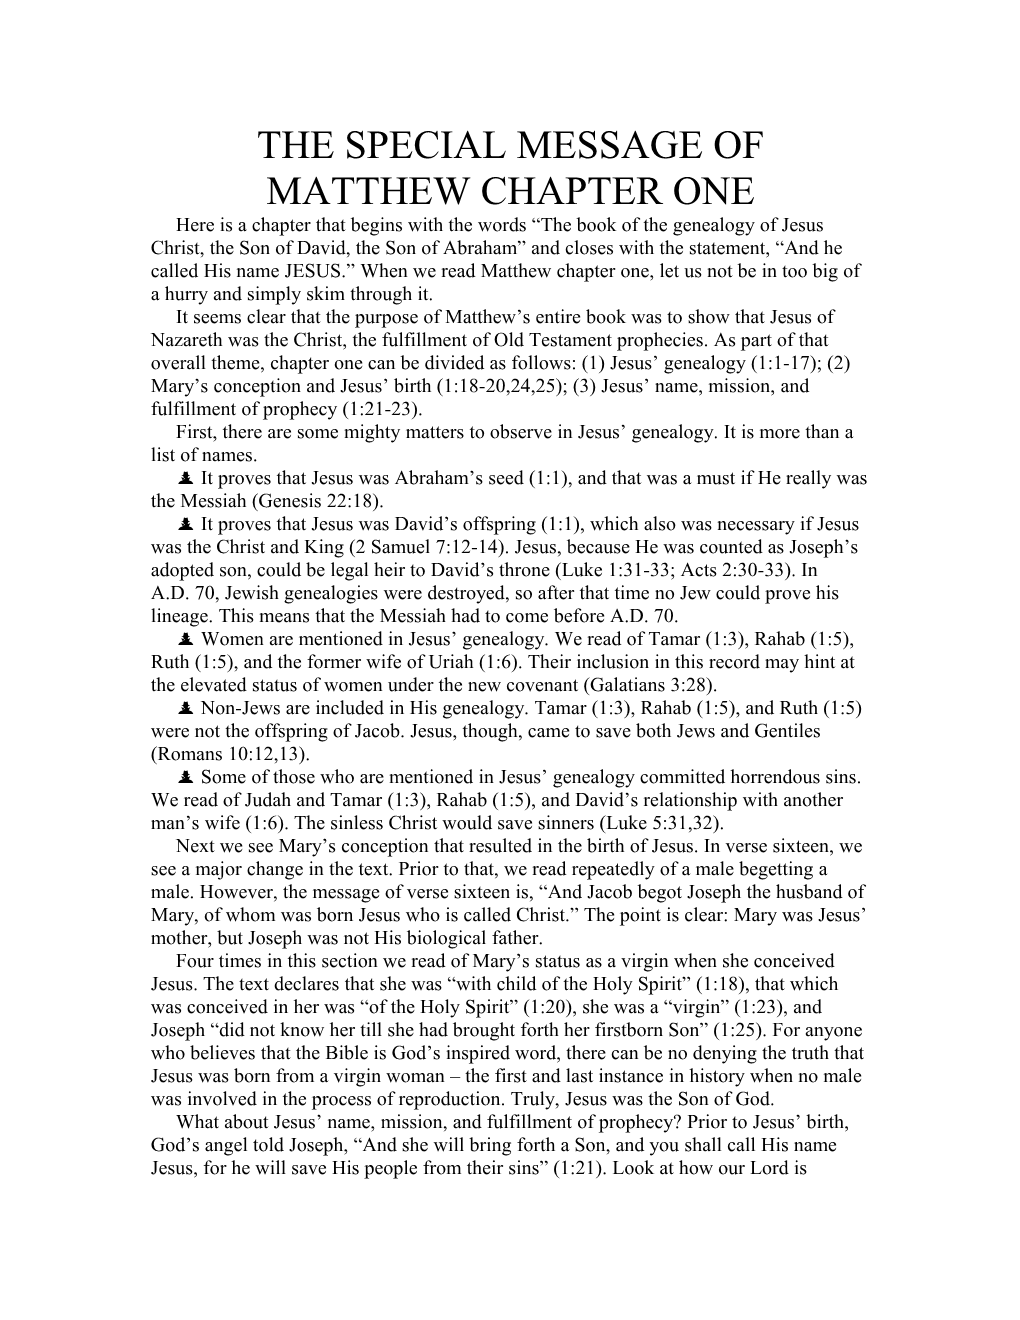 The Special Message of Matthew Chapter One